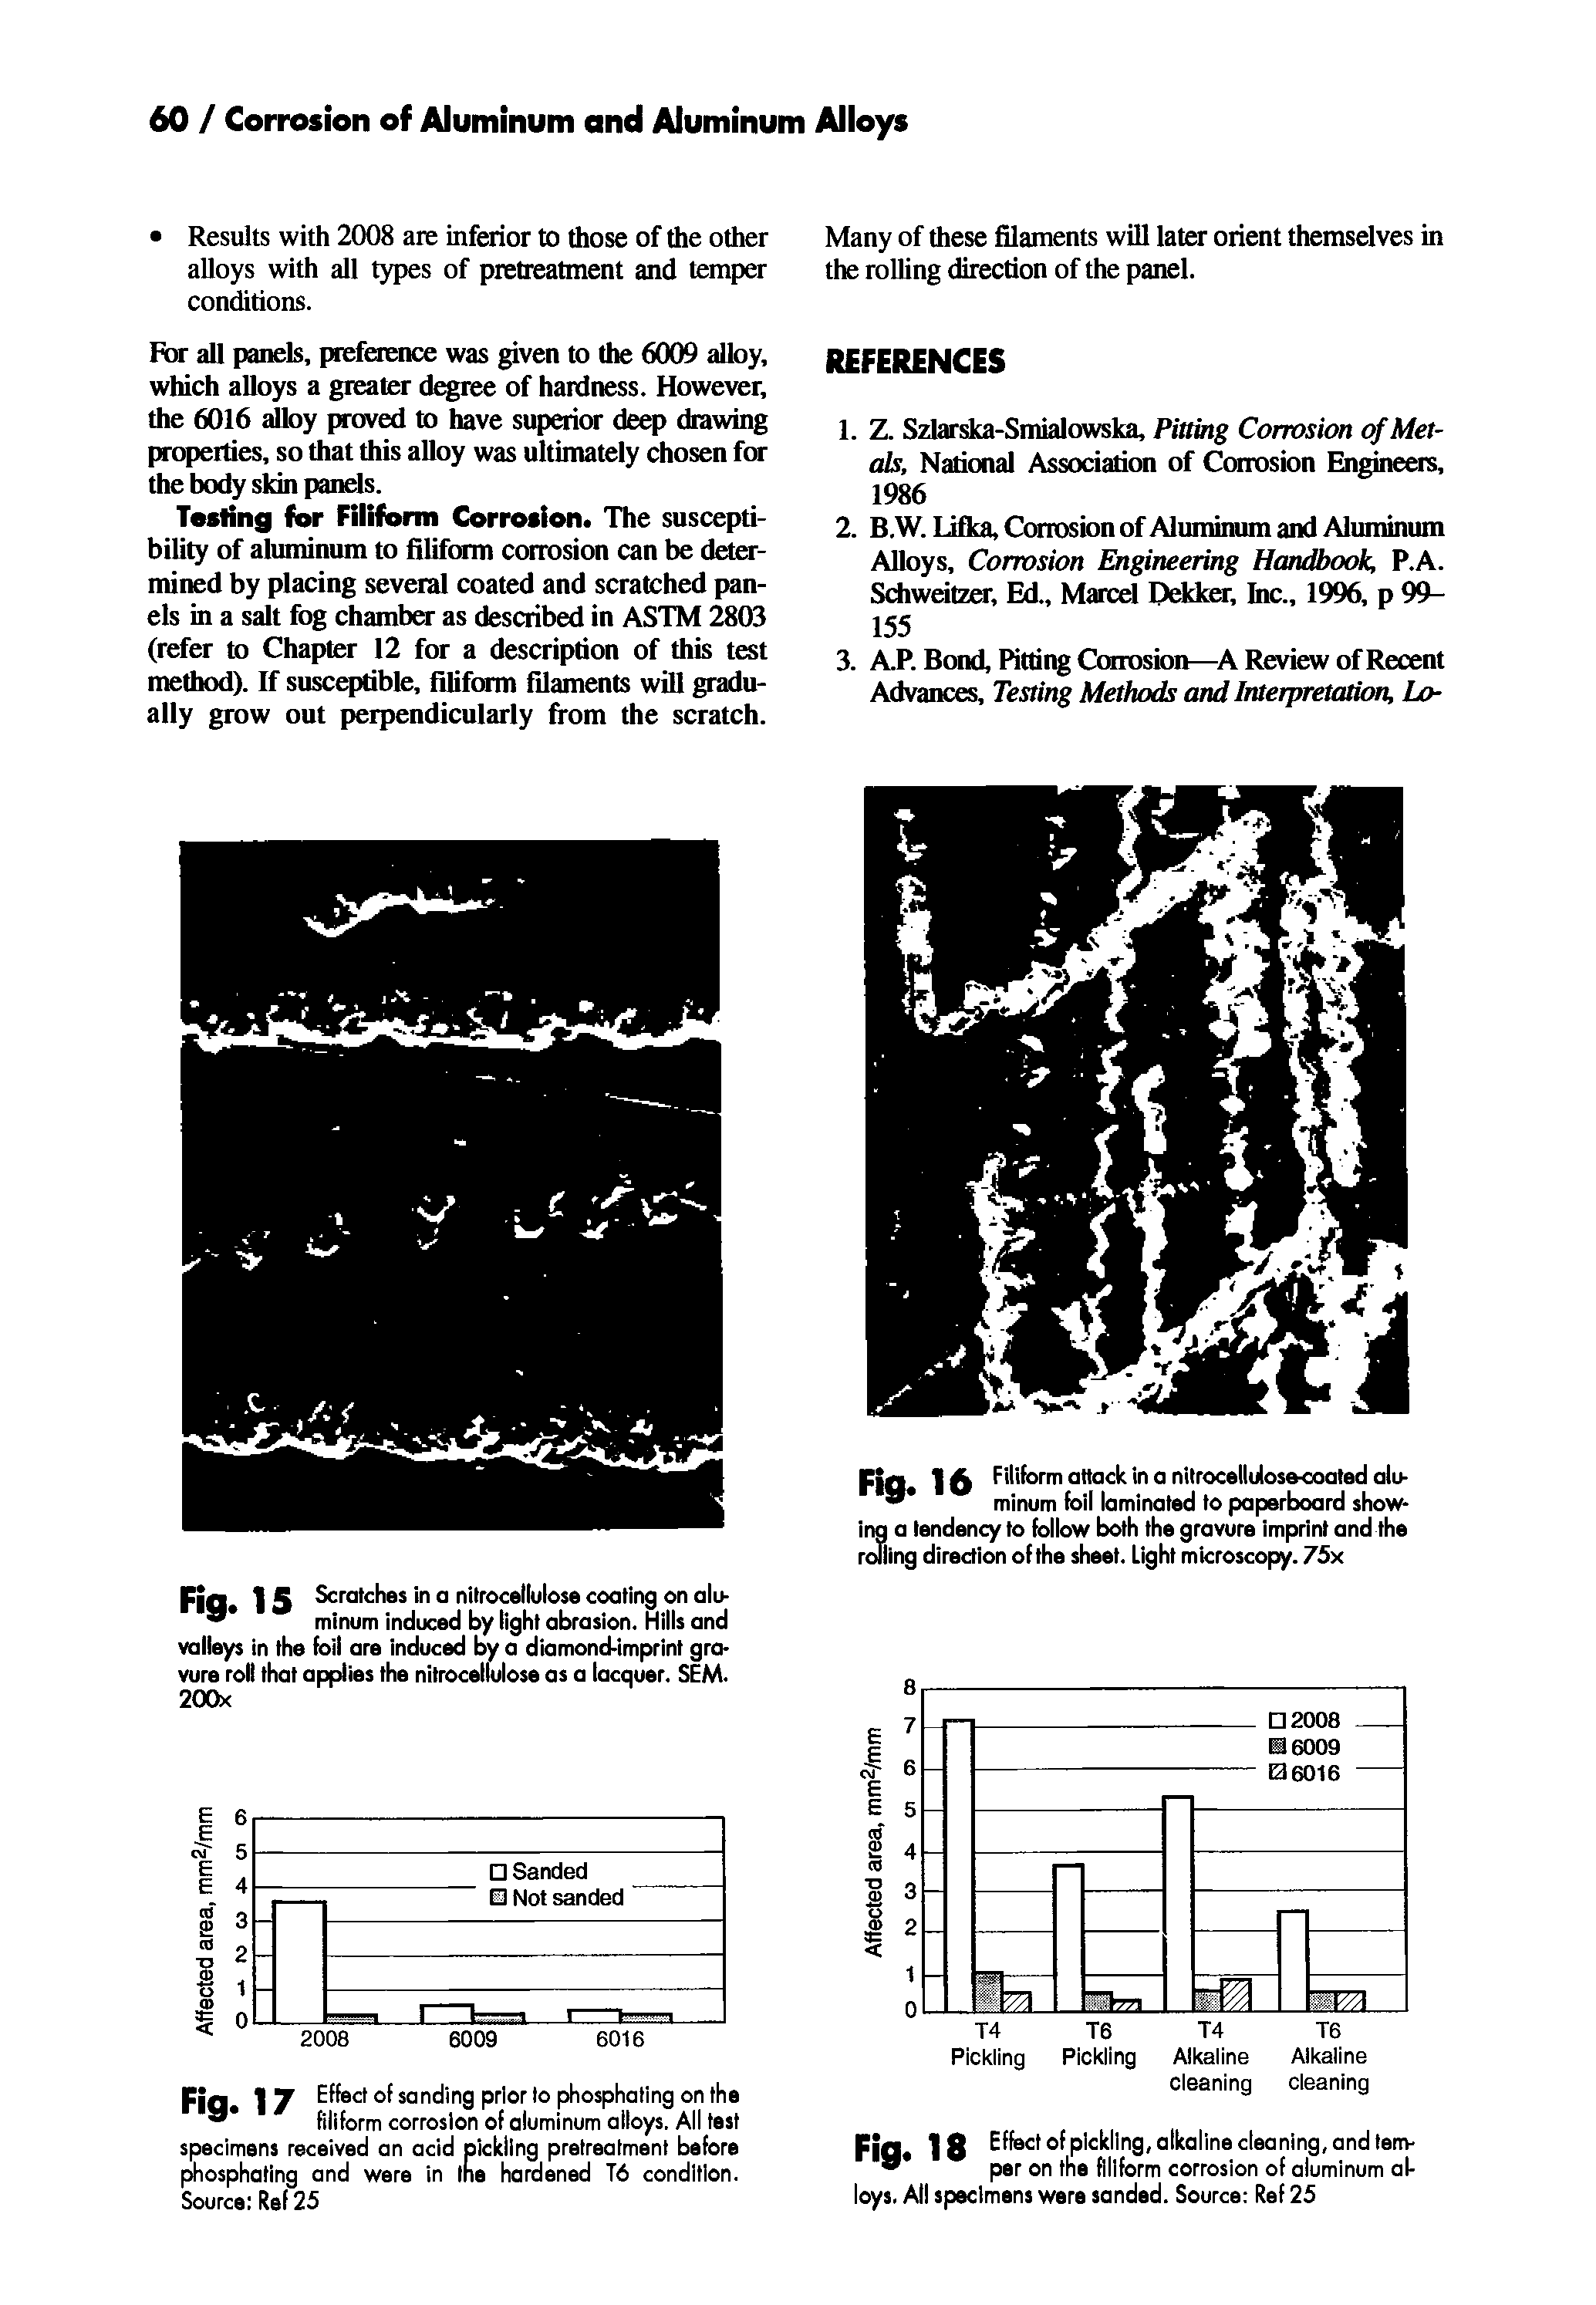 Fig. 17 Effect of sanding prior lo phosphatlng on the filiform corrosion of aluminum alloys. All test specimens received an acid pickling pretreatment before phosphatlng and were in the hardened T6 condition. Source Ref 25...